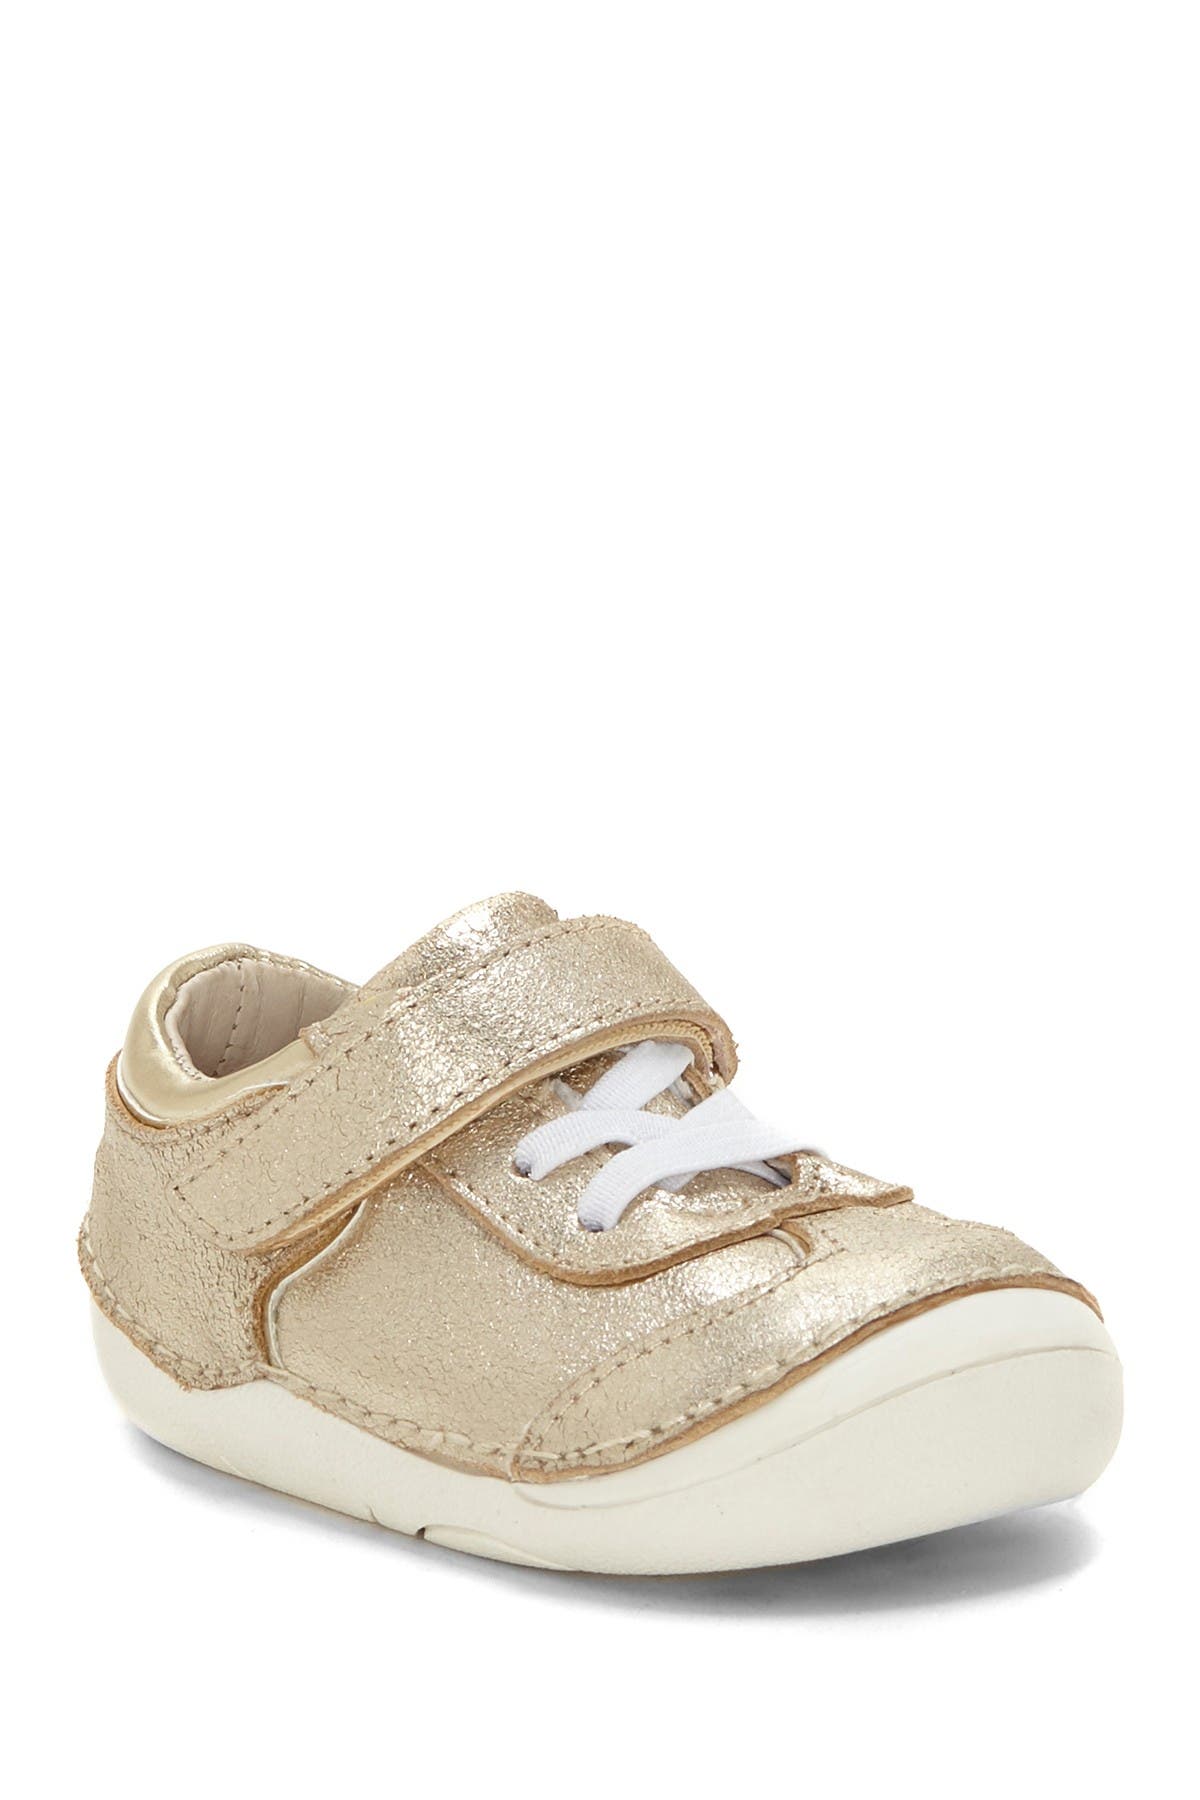 SOLE PLAY Kids' Boys' Shoes | Nordstrom 